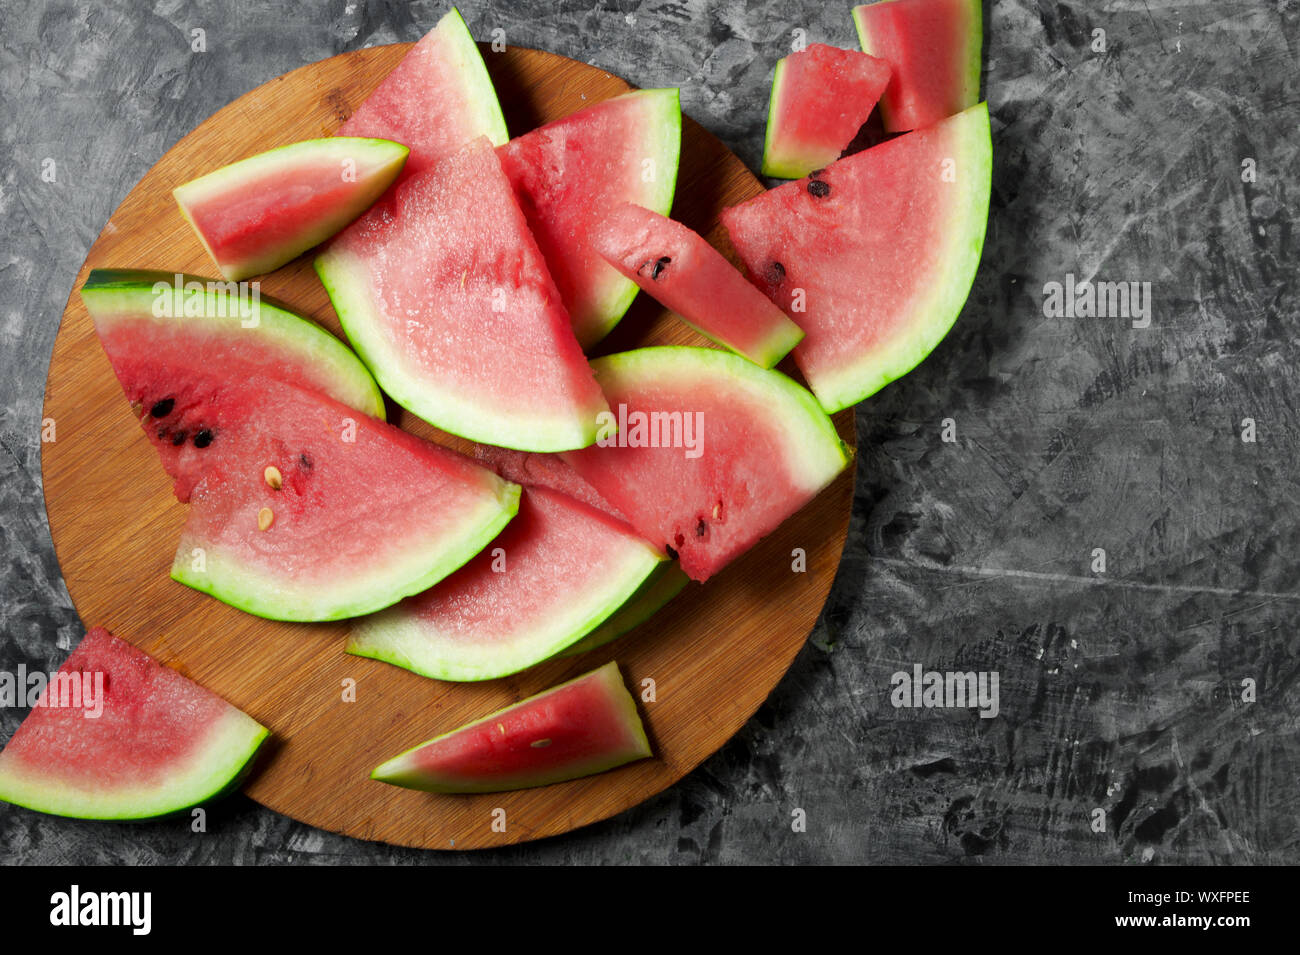 Pieces of watermelon. Sliced juicy watermelon on a gray concrete surface. View from above. Copy space. Stock Photo